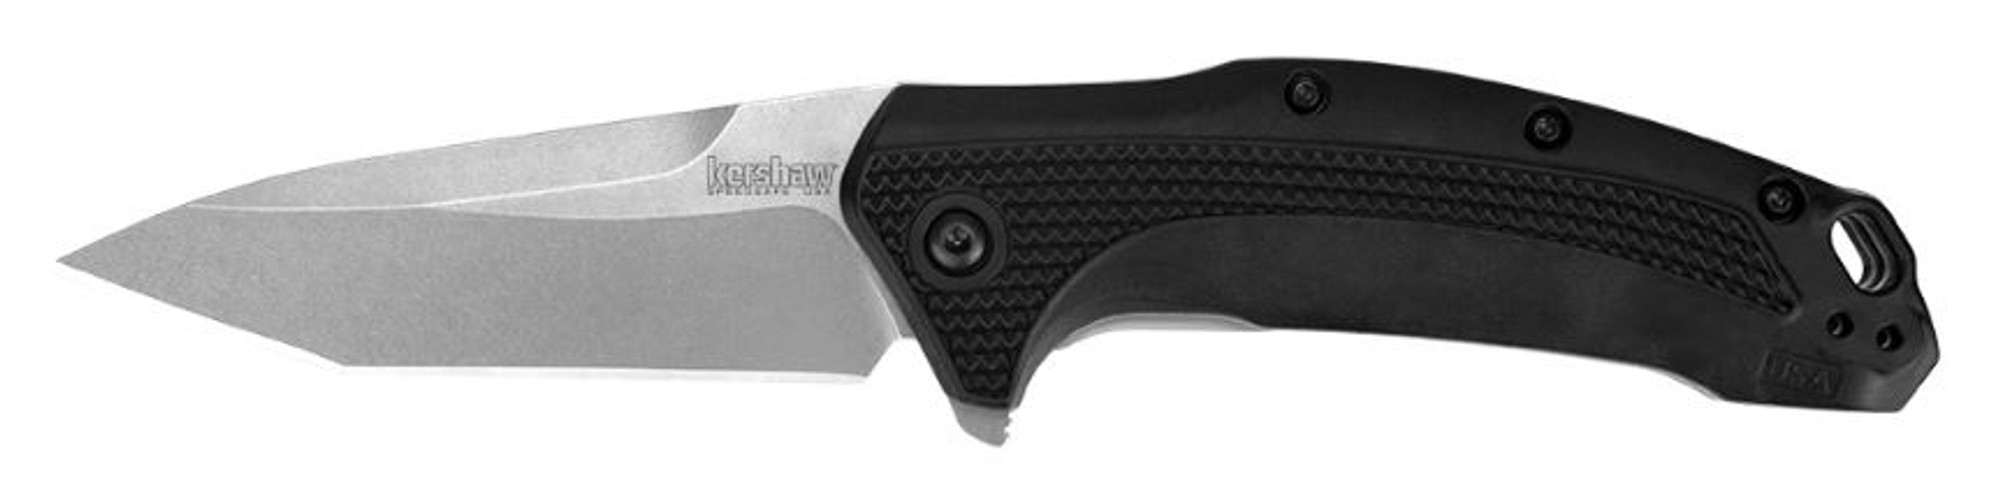 Kershaw Link Tanto Assisted Opening Folder K1776T